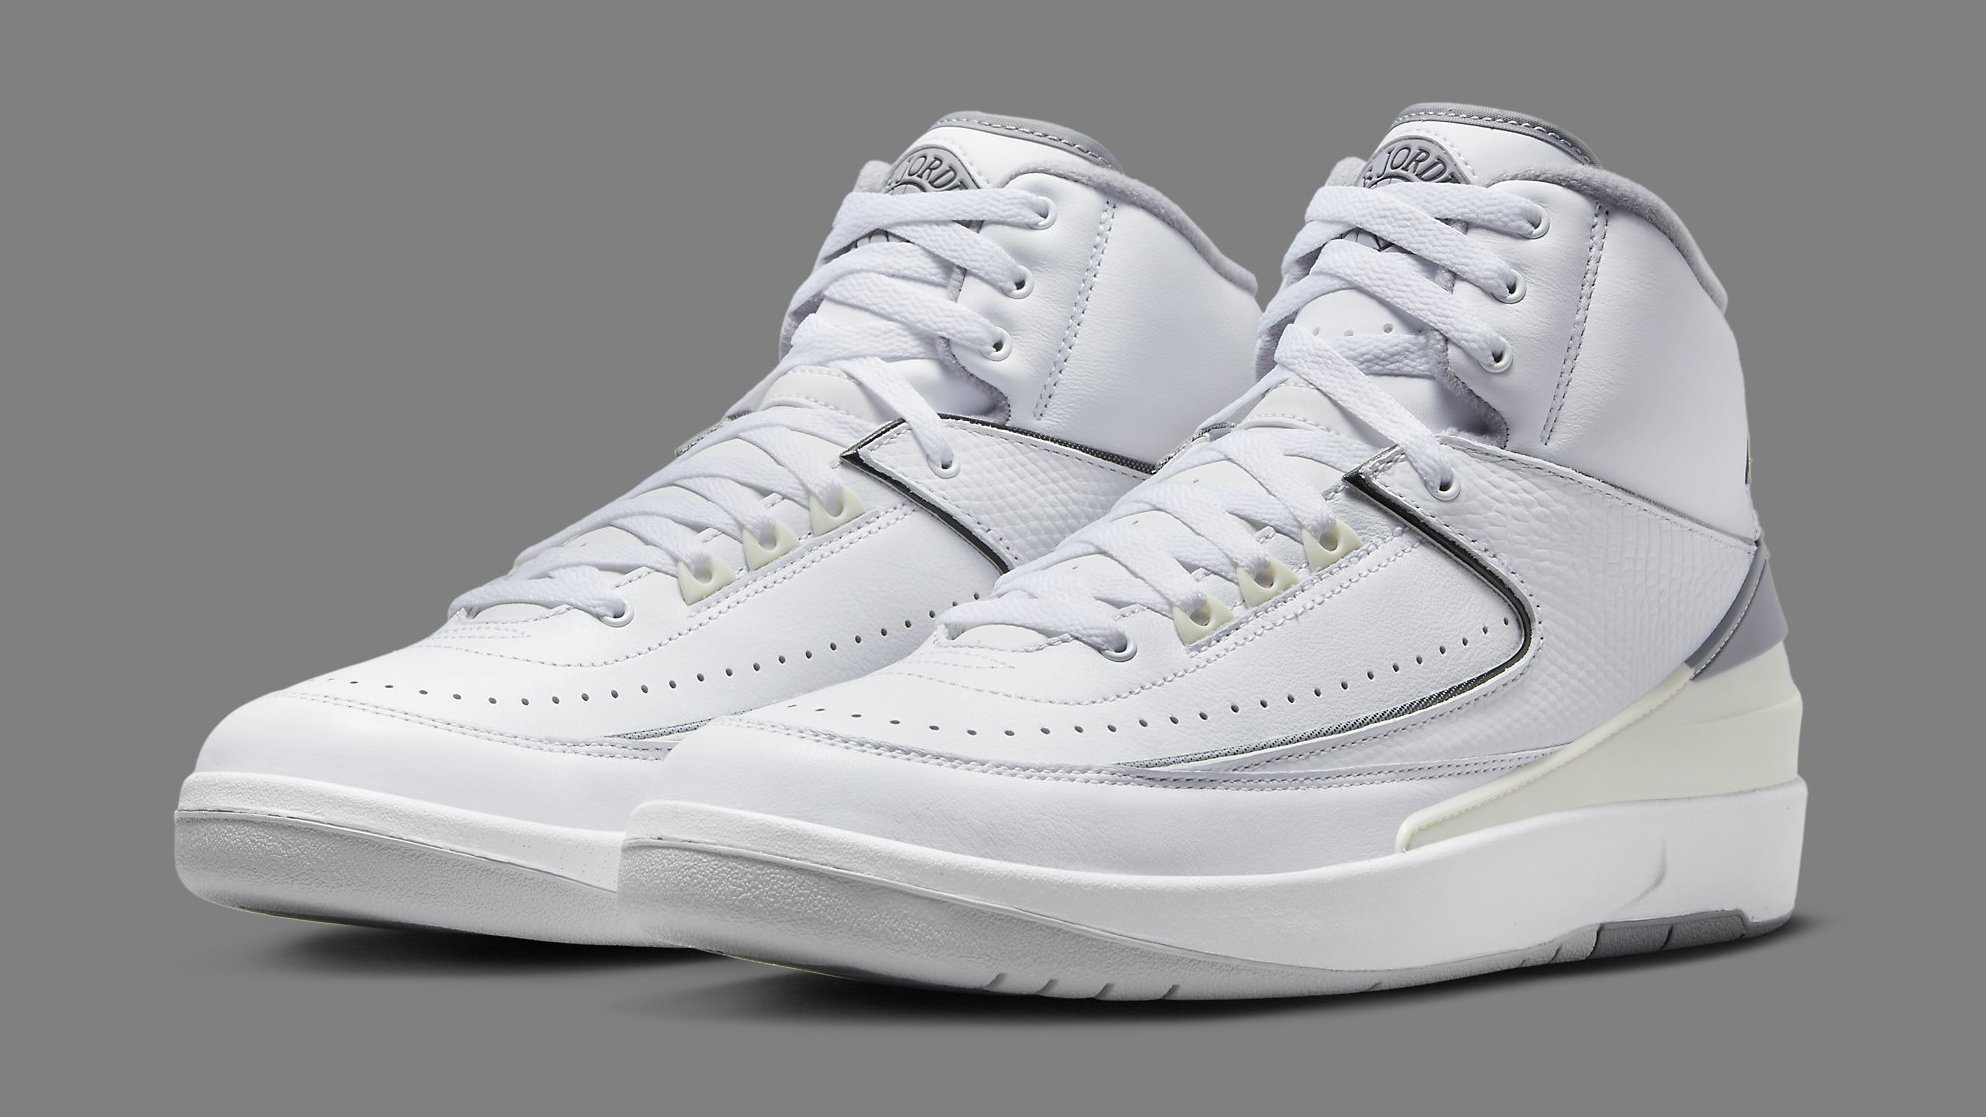 This Air Jordan 2 Comes With Special Insoles